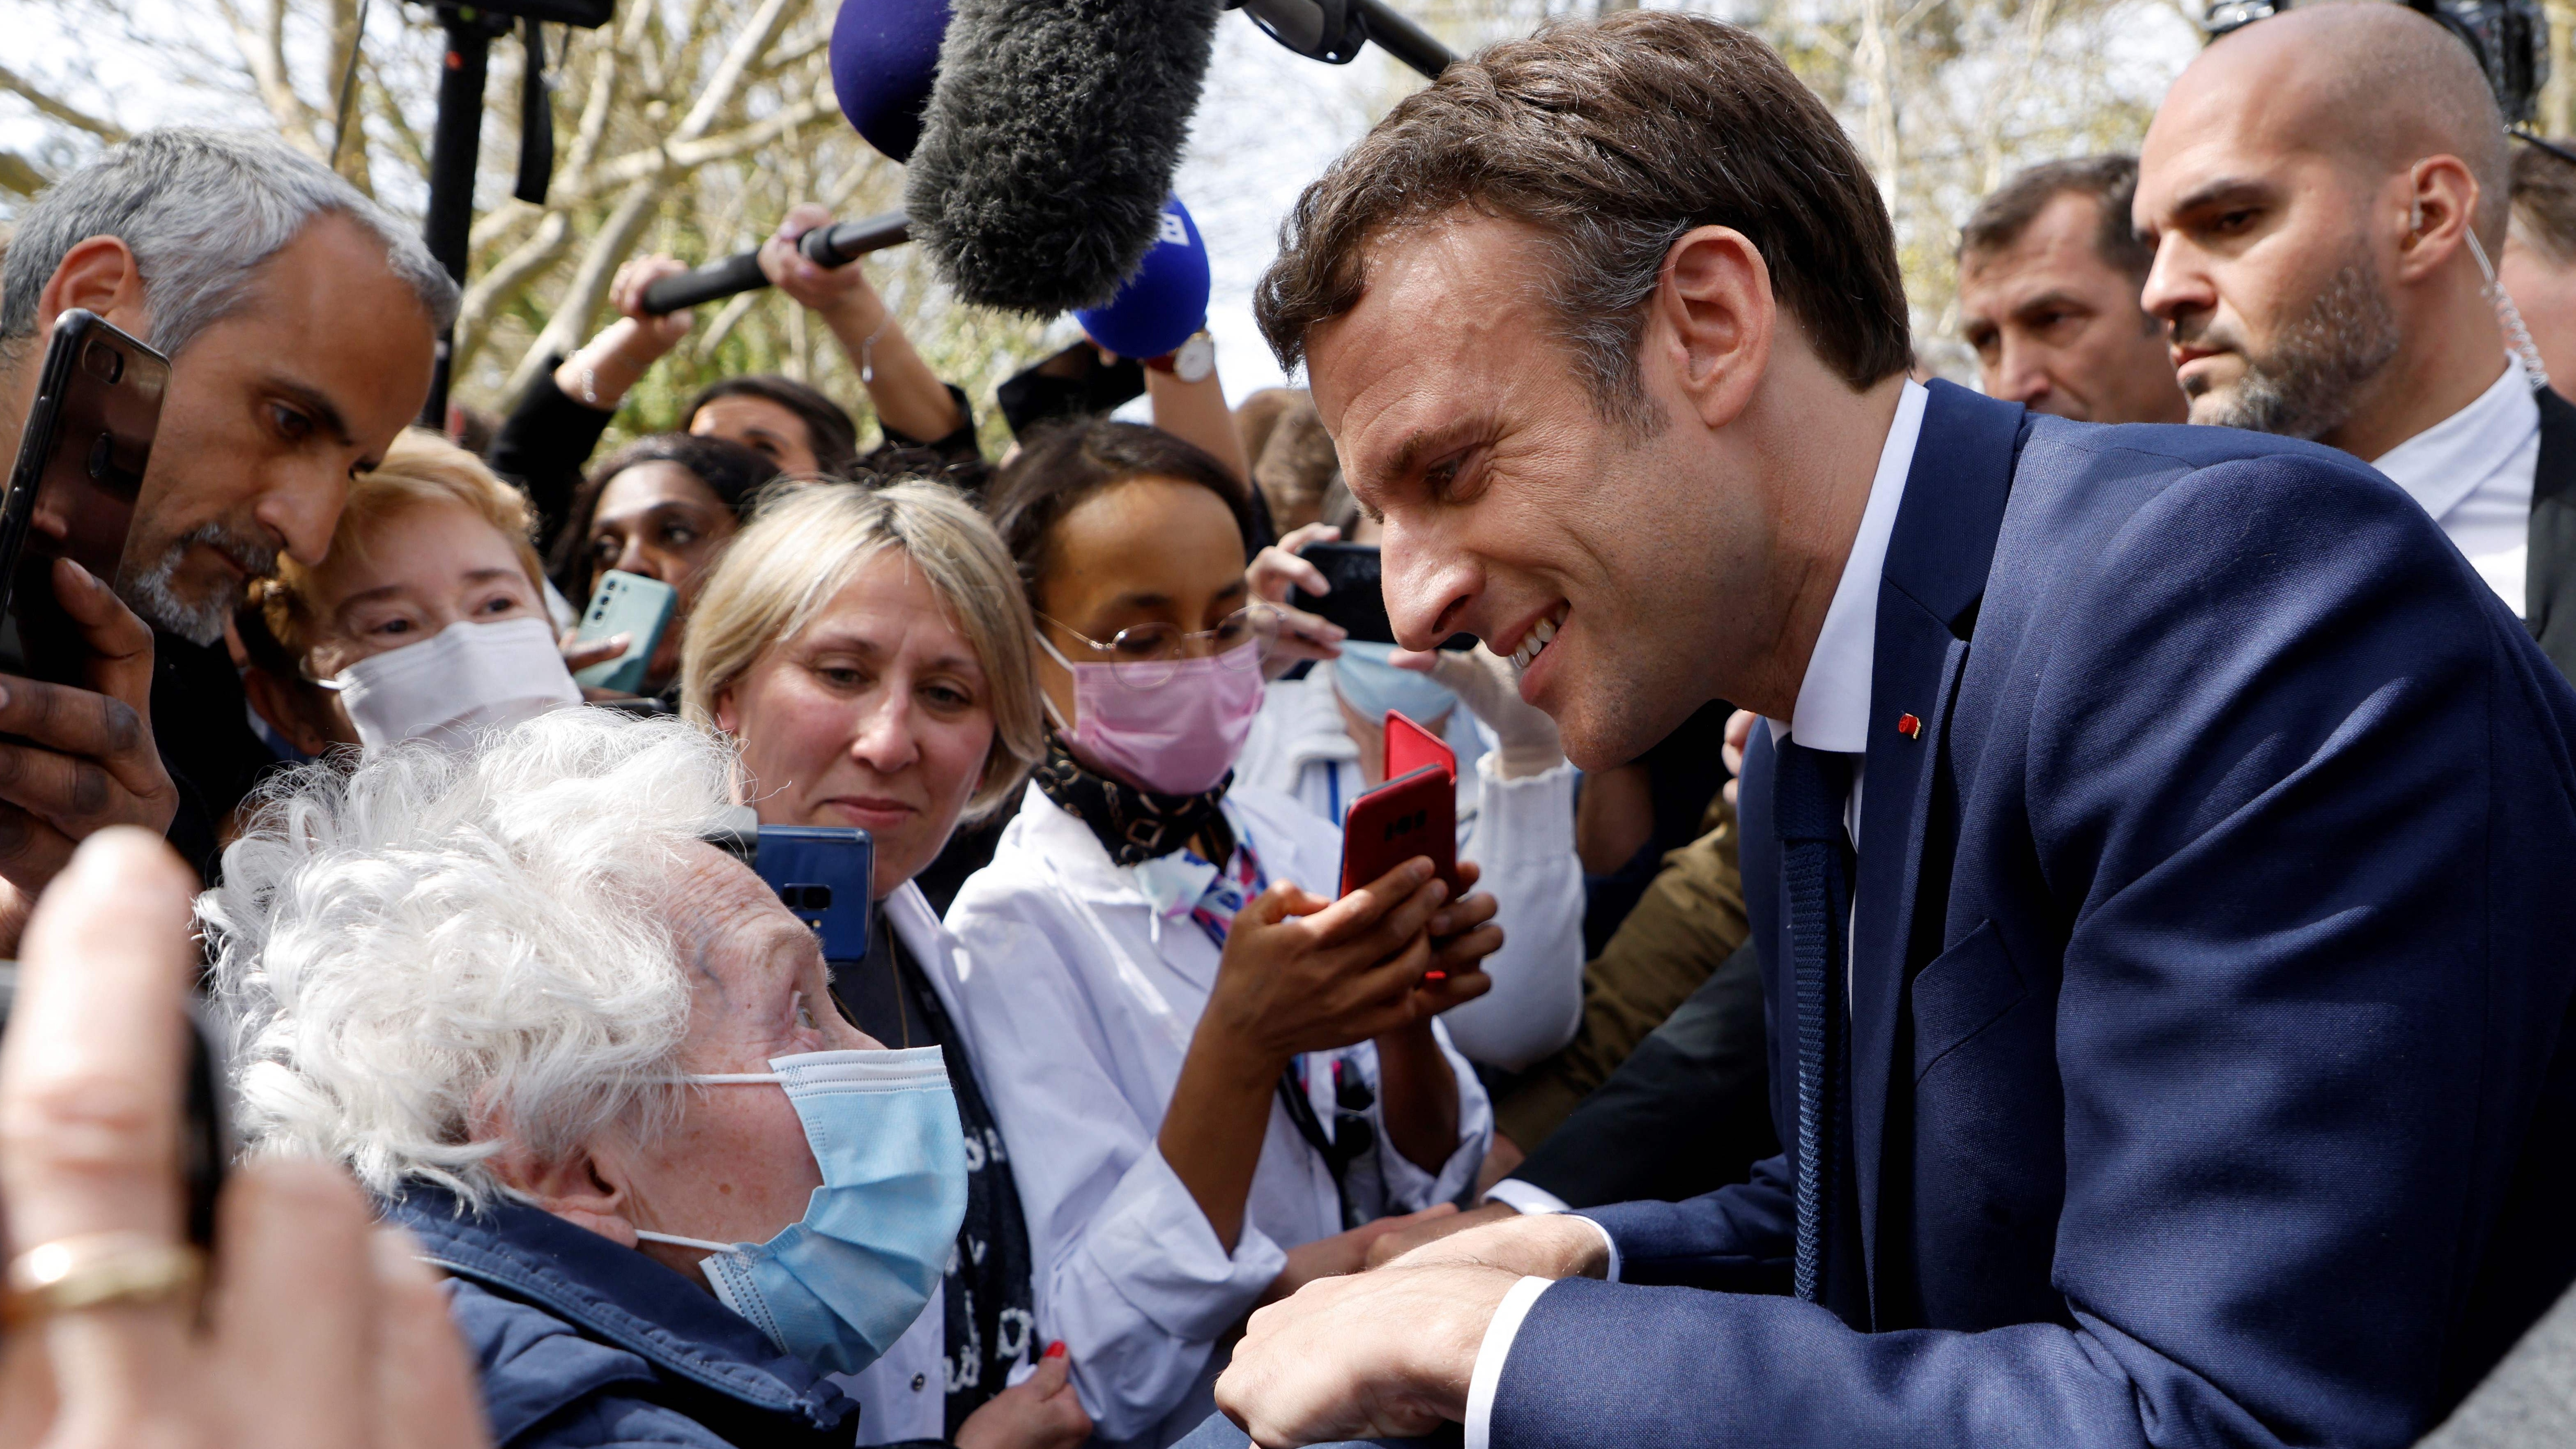 Emmanuel Macron hits the campaign trail in eastern France